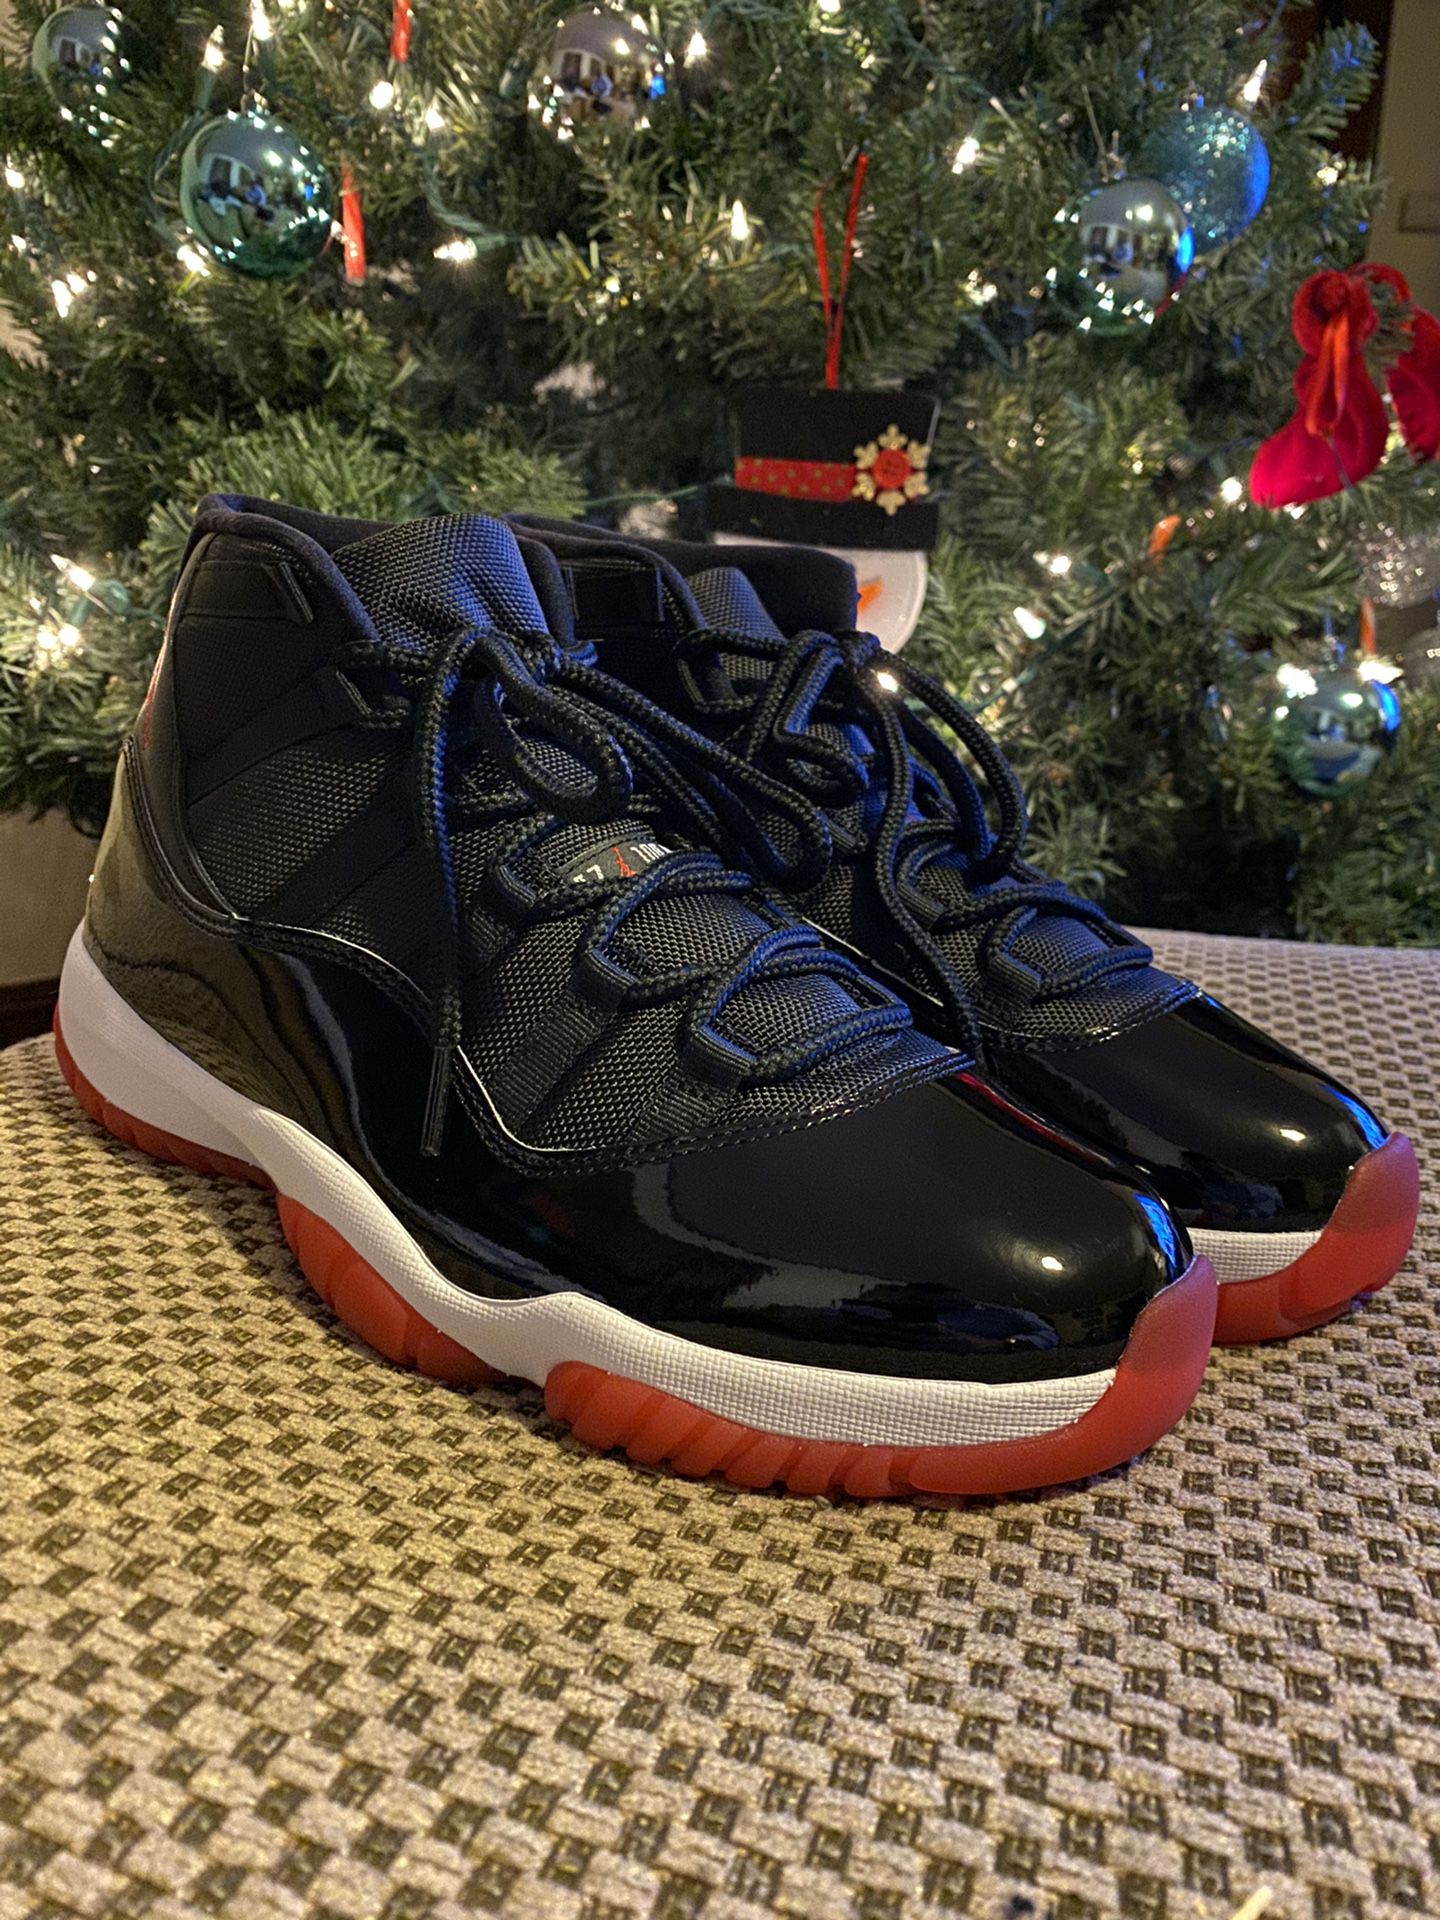 Air Jordan Bred 11 2019 size 8 Team Early New DS